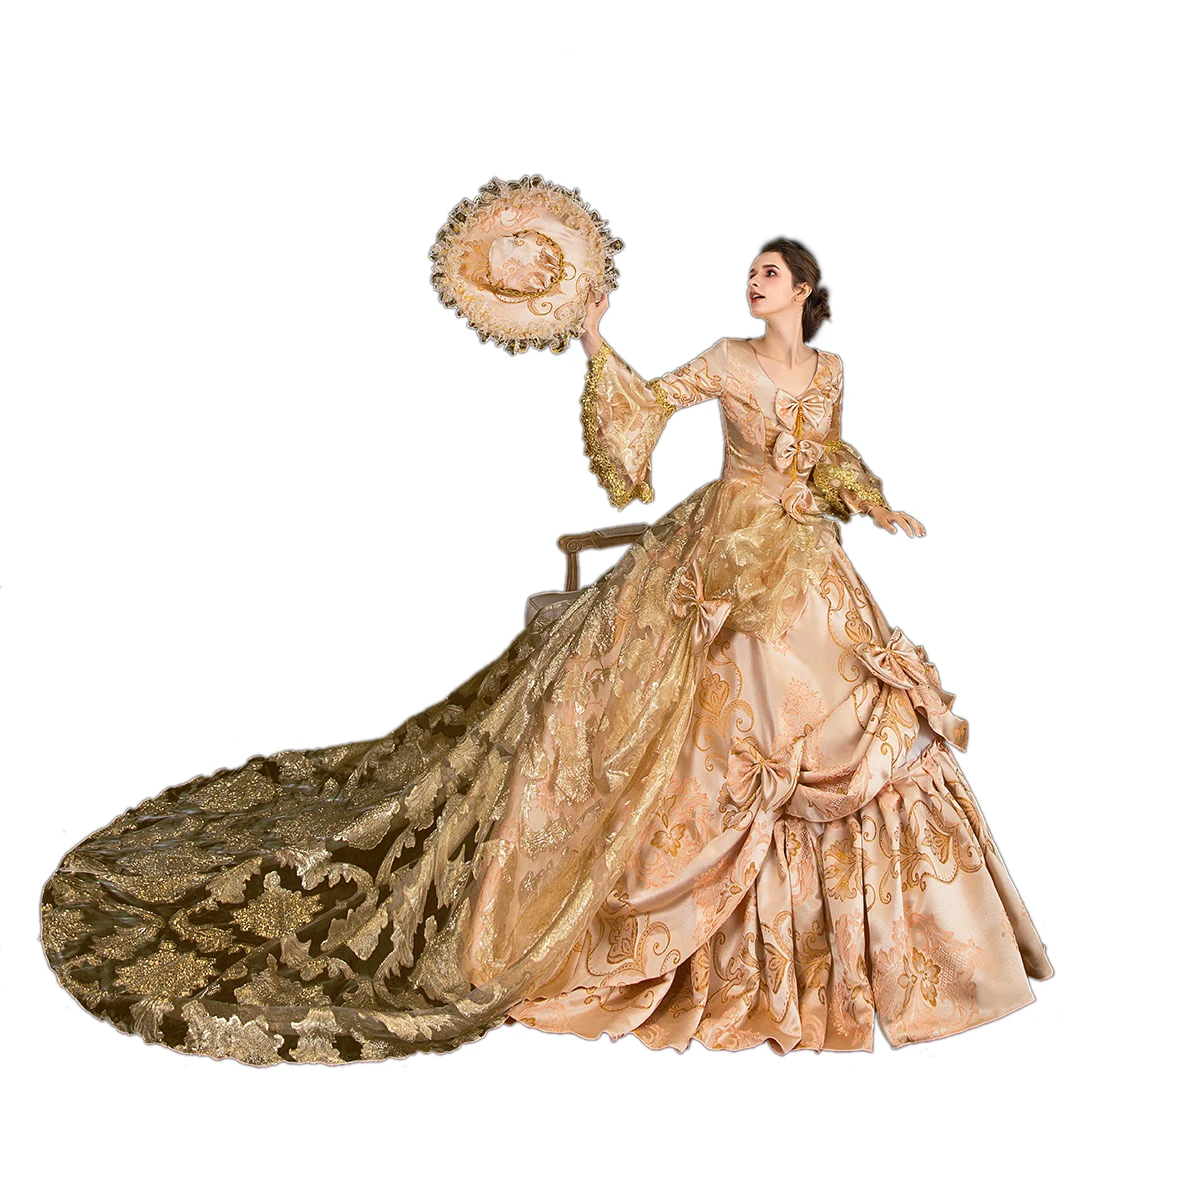 

Rococo Golden court suit British noble princess costume party masquerade party Annual Meeting Drama Studio Victorian dress